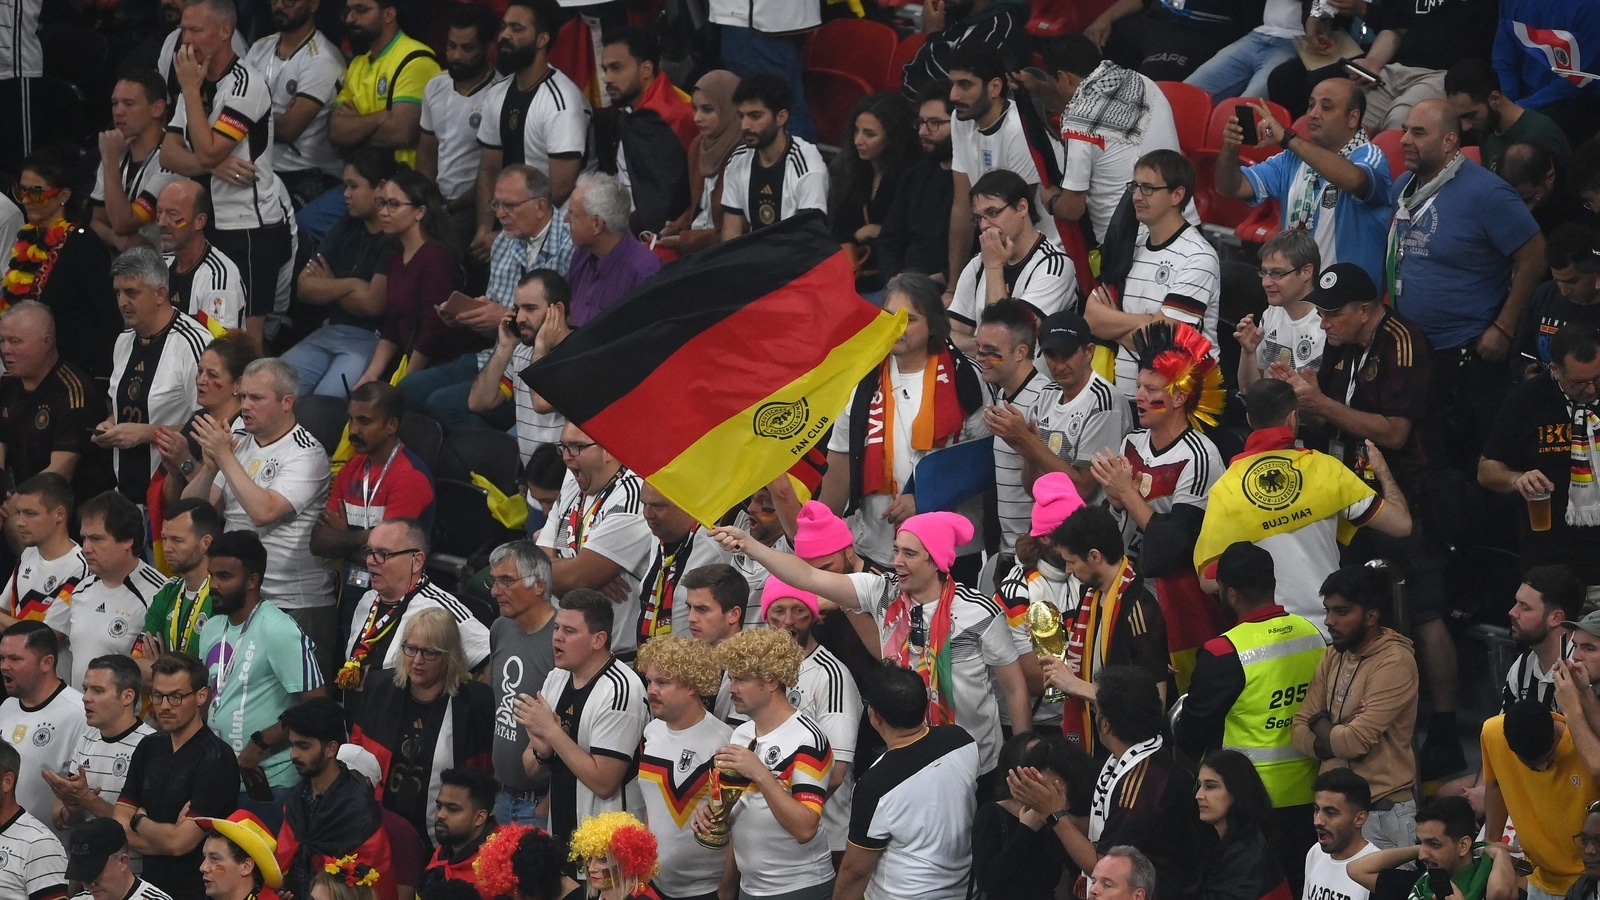 ‘We deserved it’: German fans react after early FIFA World Cup exit